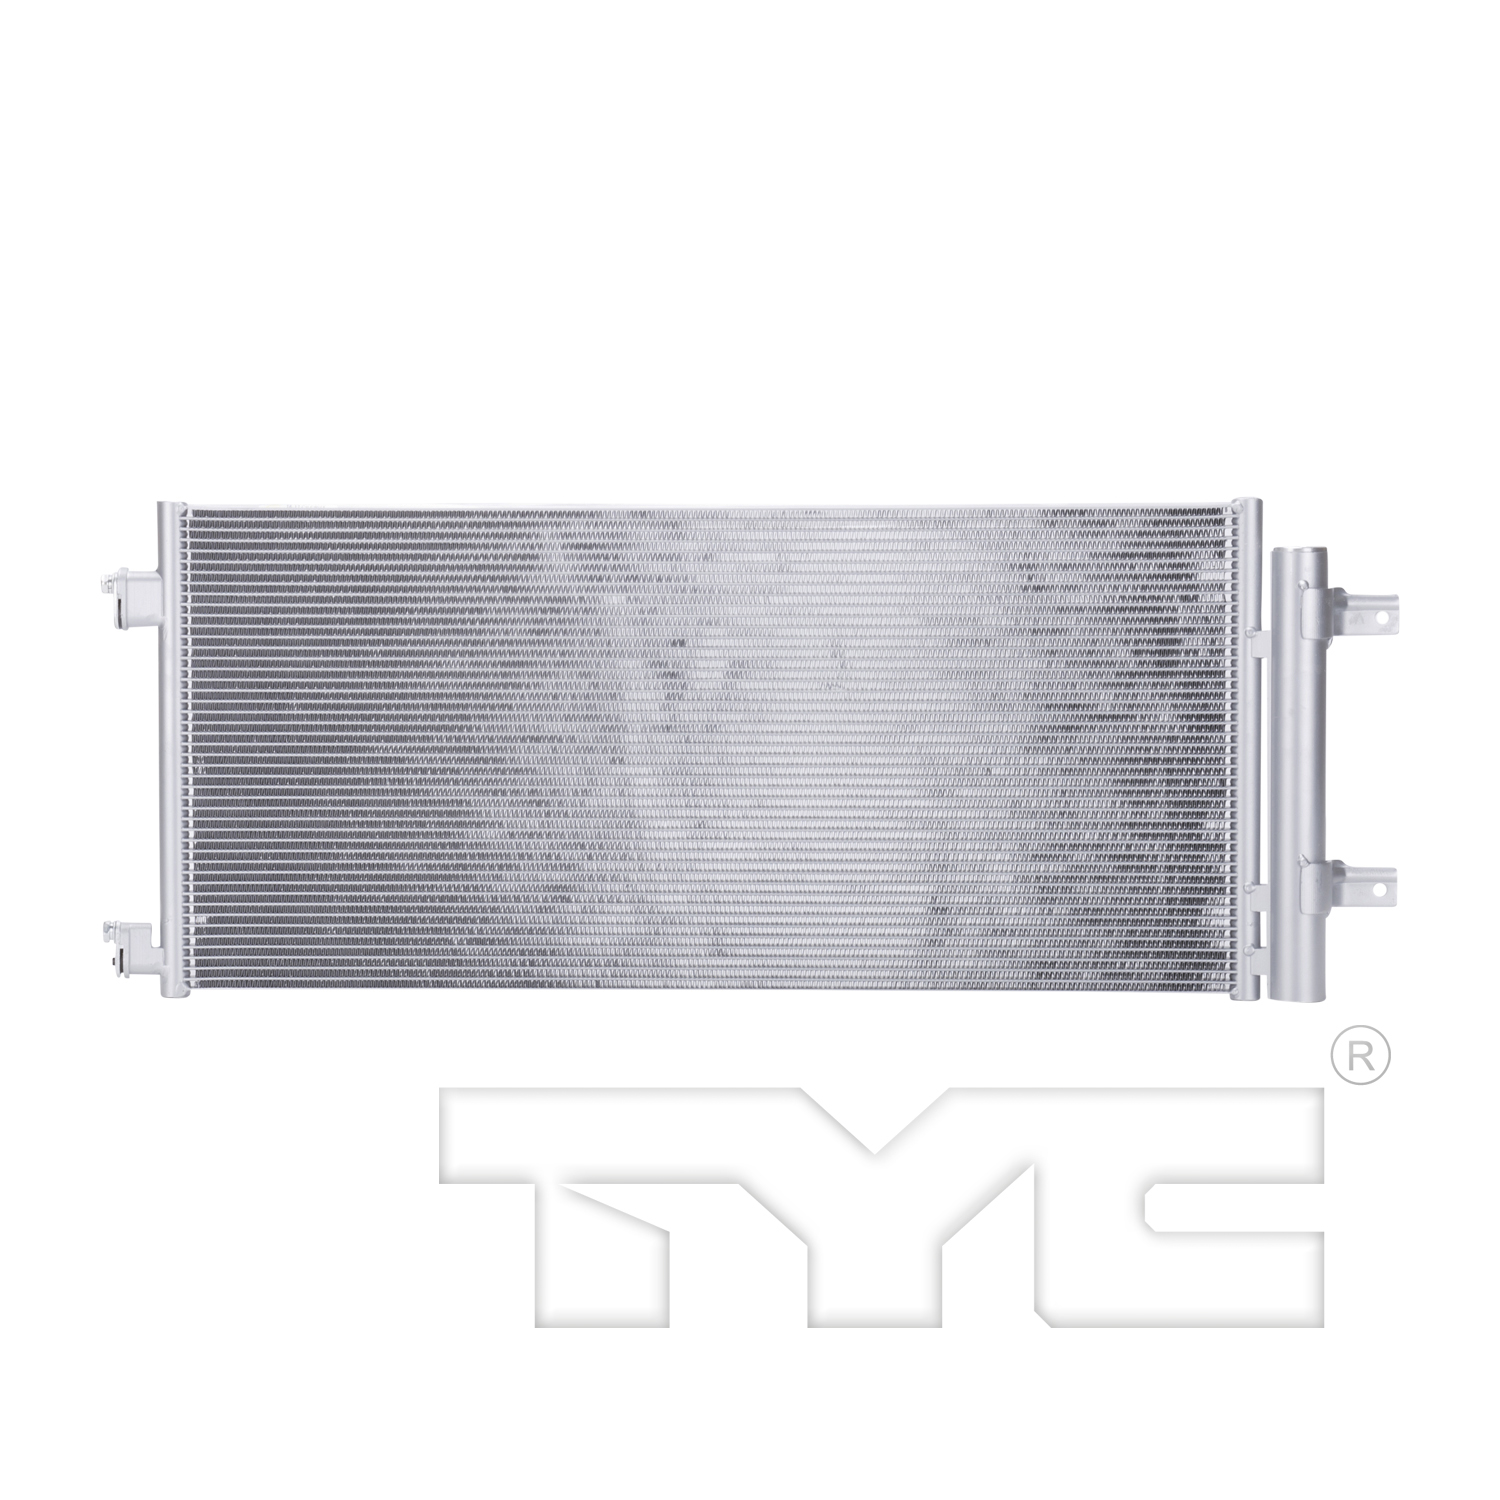 Aftermarket AC CONDENSERS for CHEVROLET - CRUZE, CRUZE,16-18,Air conditioning condenser